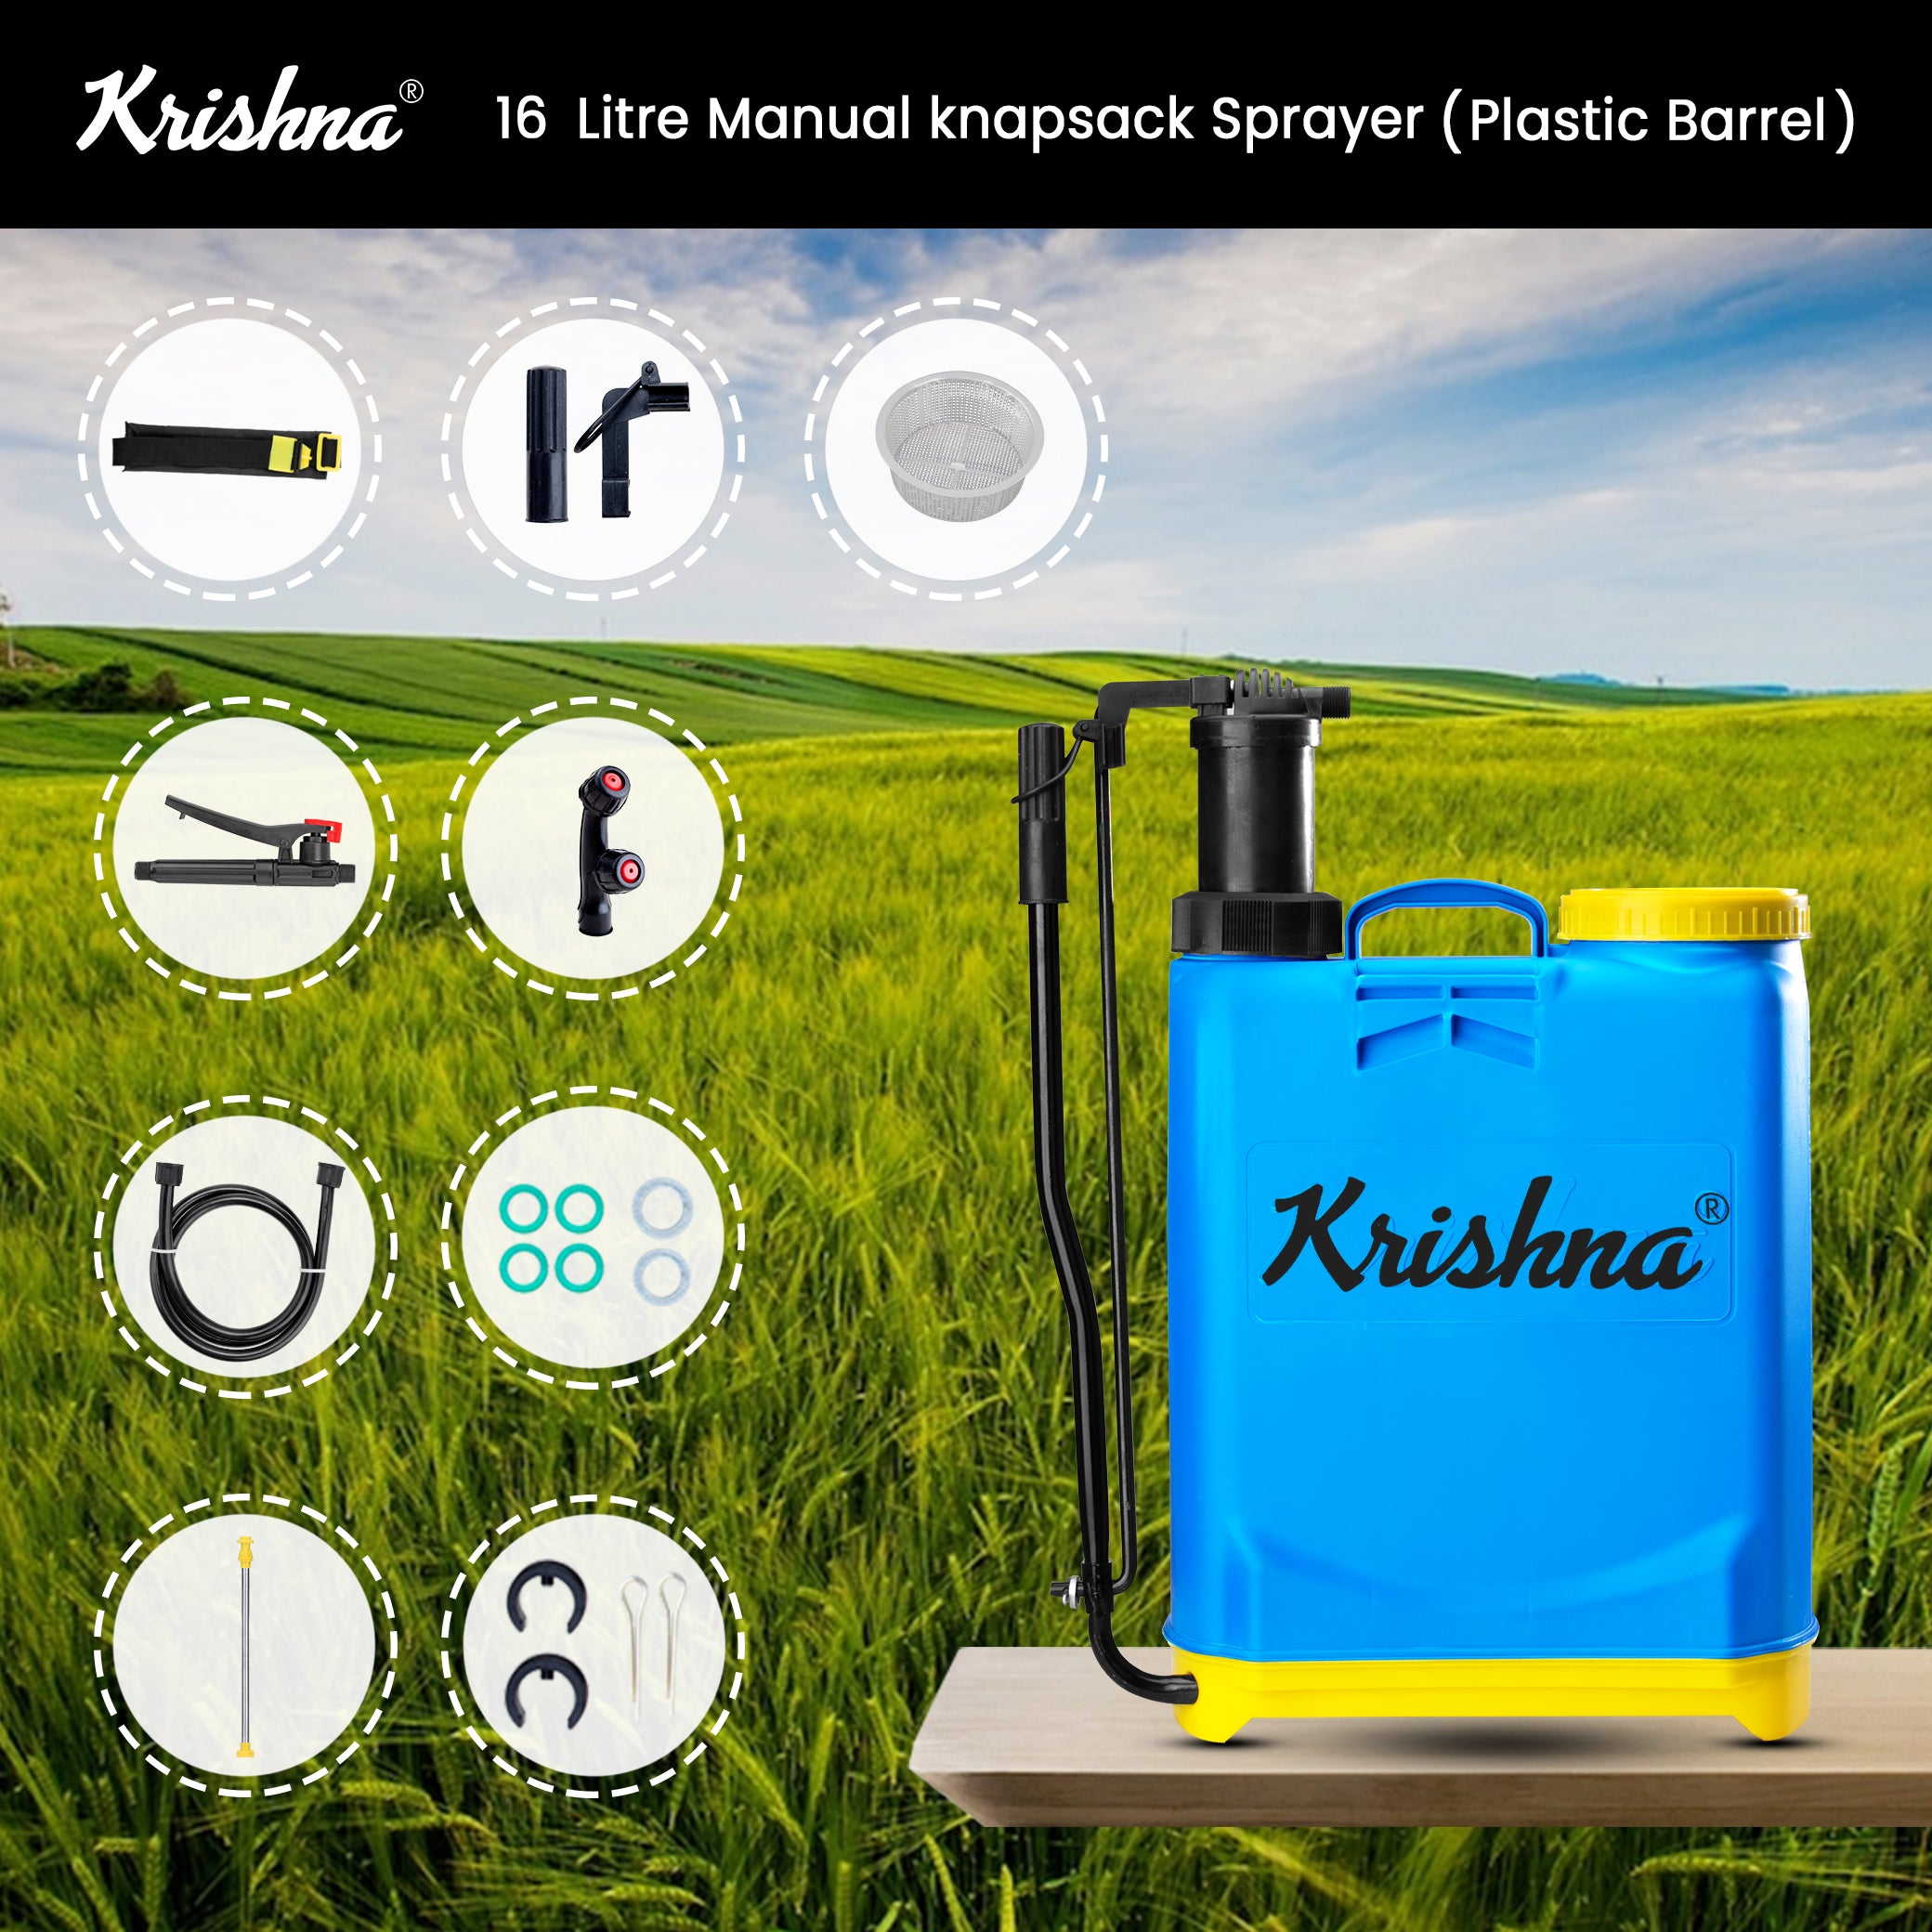 Krishna Plastic Barrel Hand Operated Manual Sprayer For Agriculture And Gardening 16L MFP-MS-PB-PS